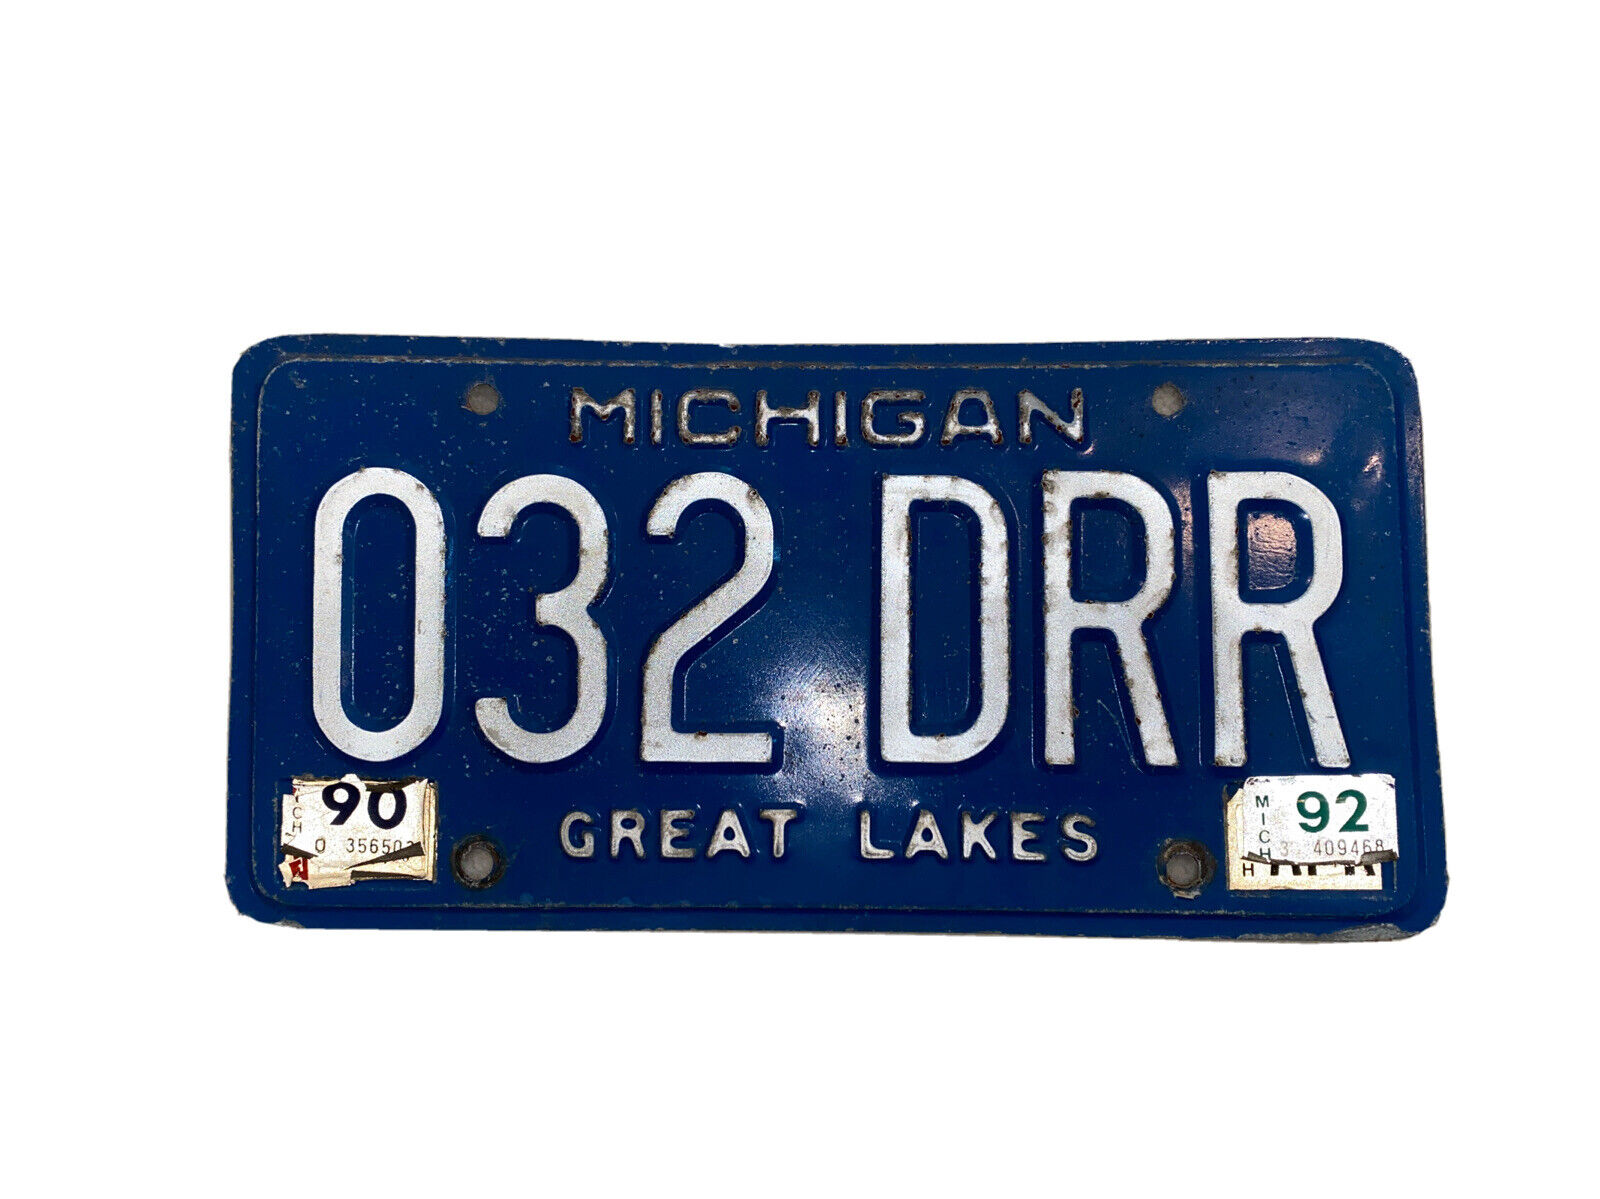 1992 Michigan License Plate Great Lakes Blue # 032 DRR